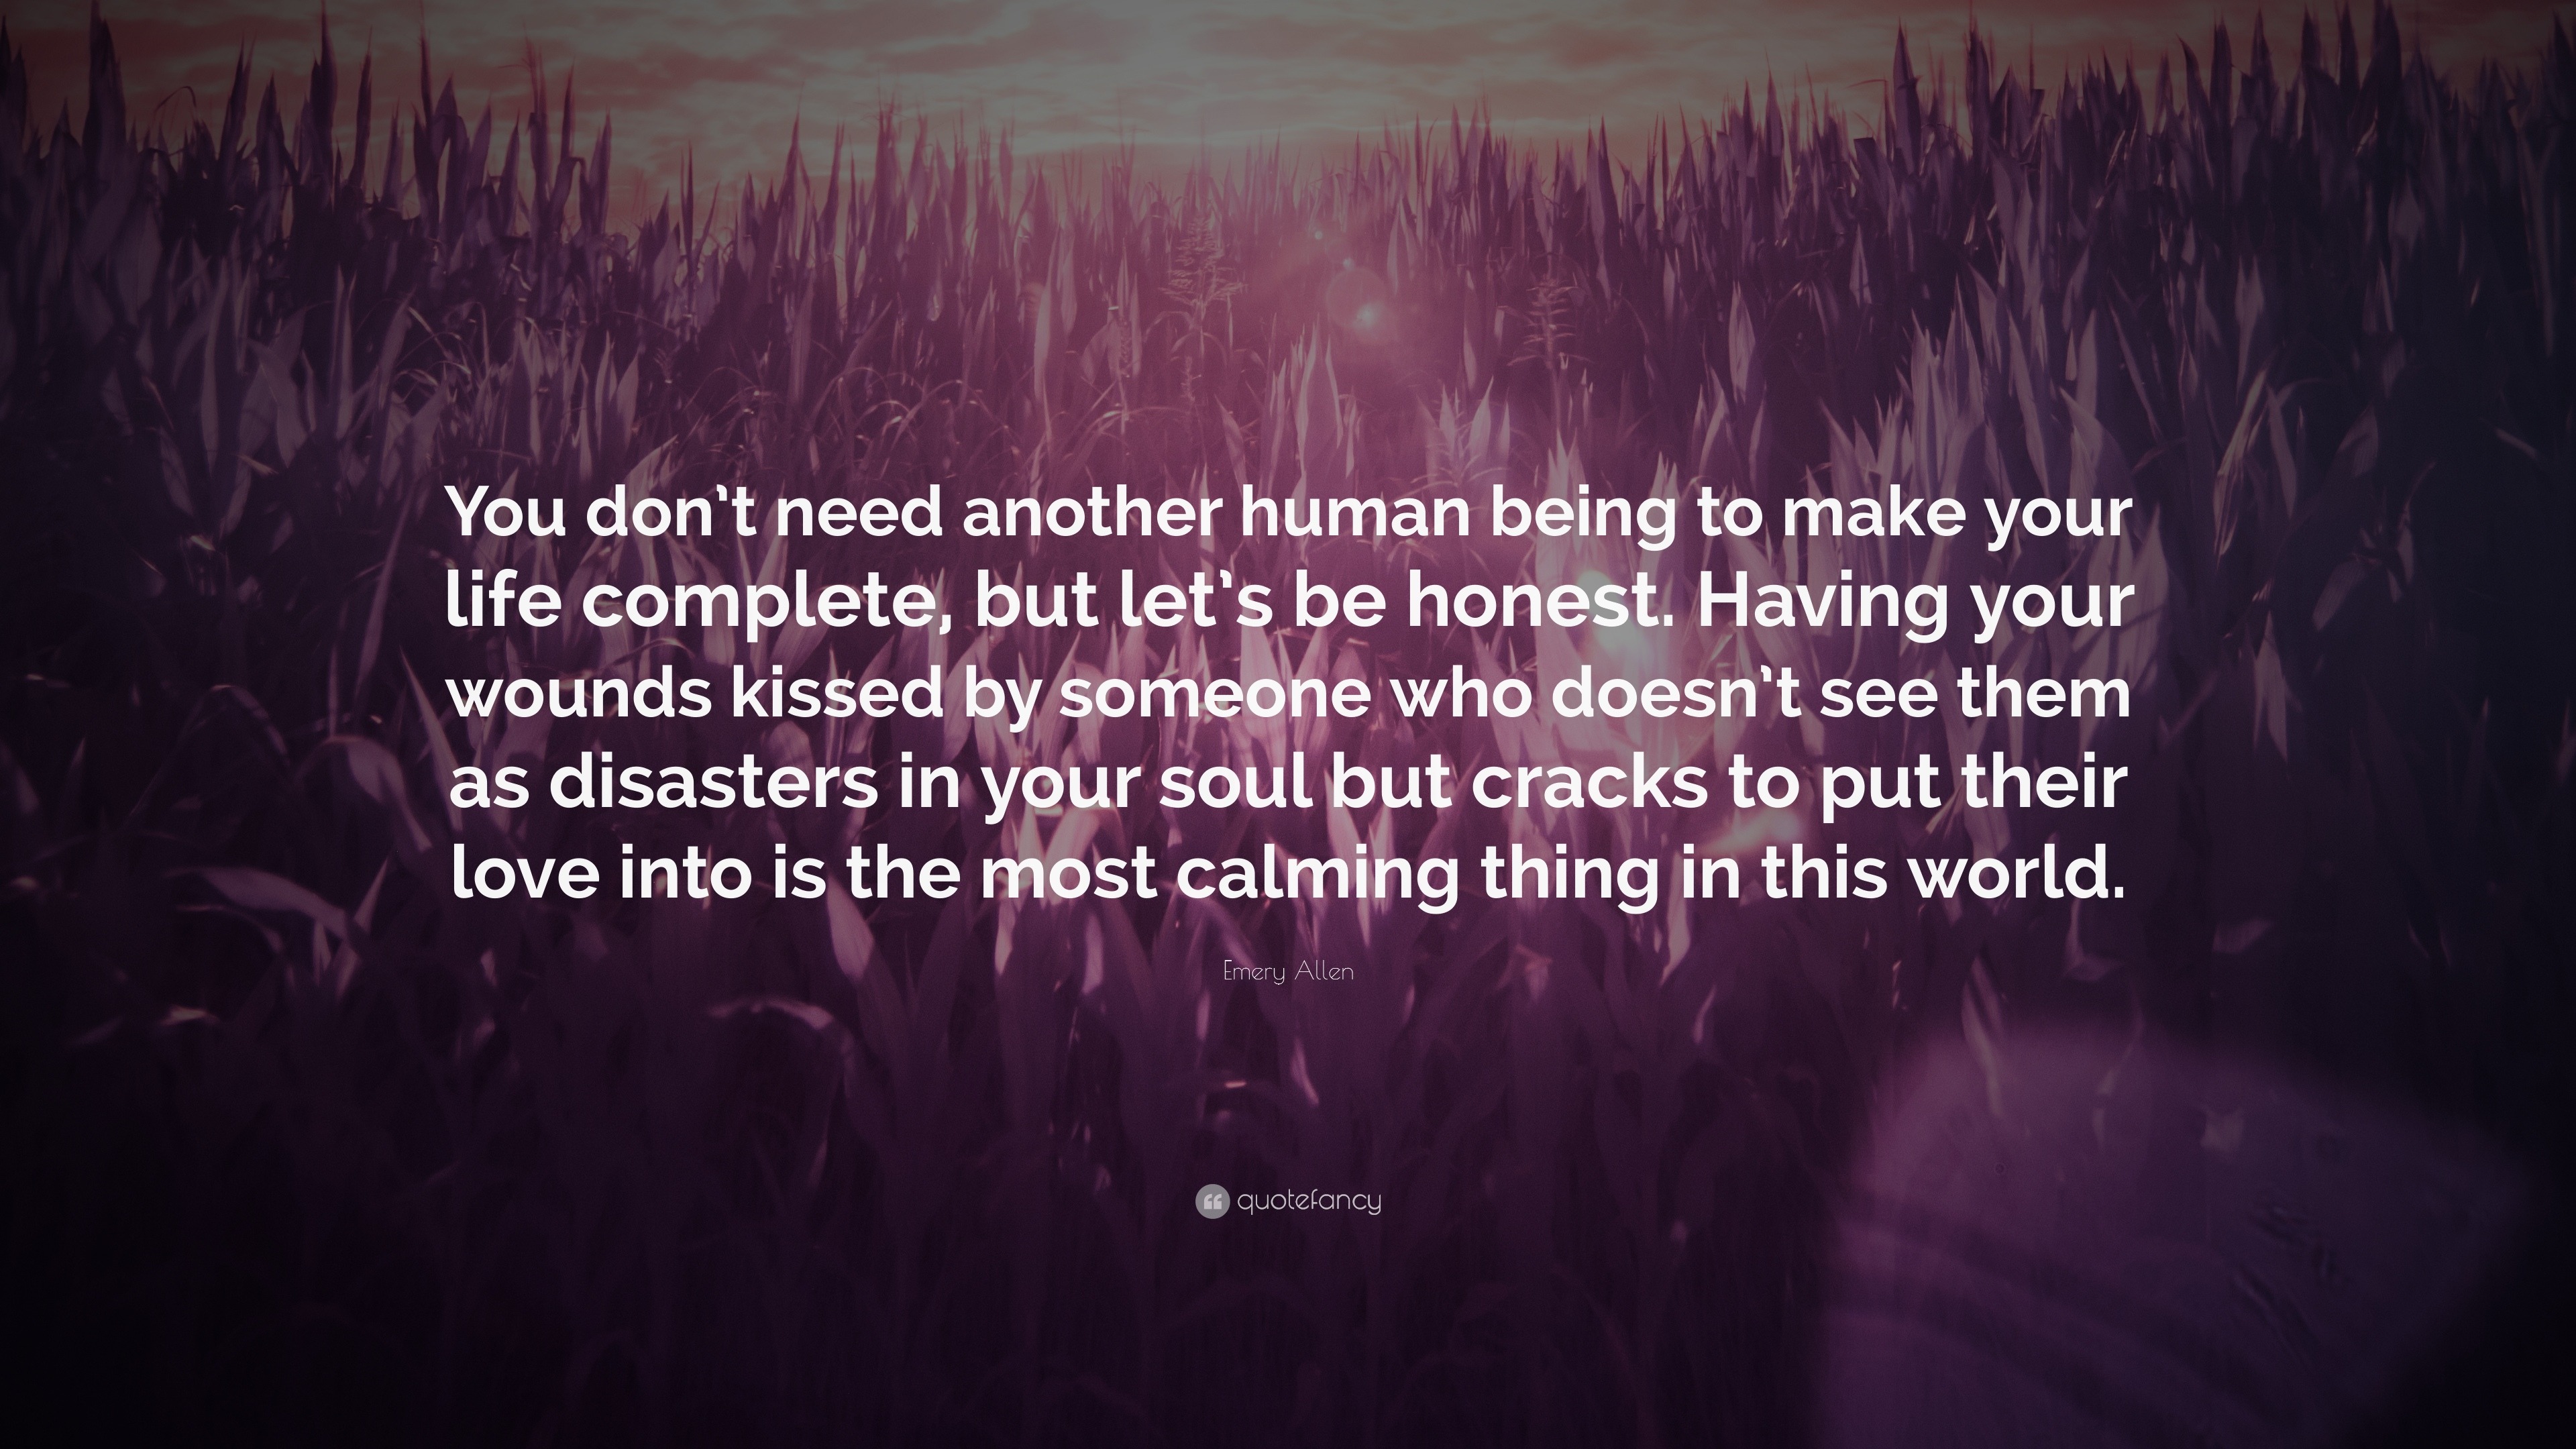 Emery Allen Quote: “You don’t need another human being to make your ...